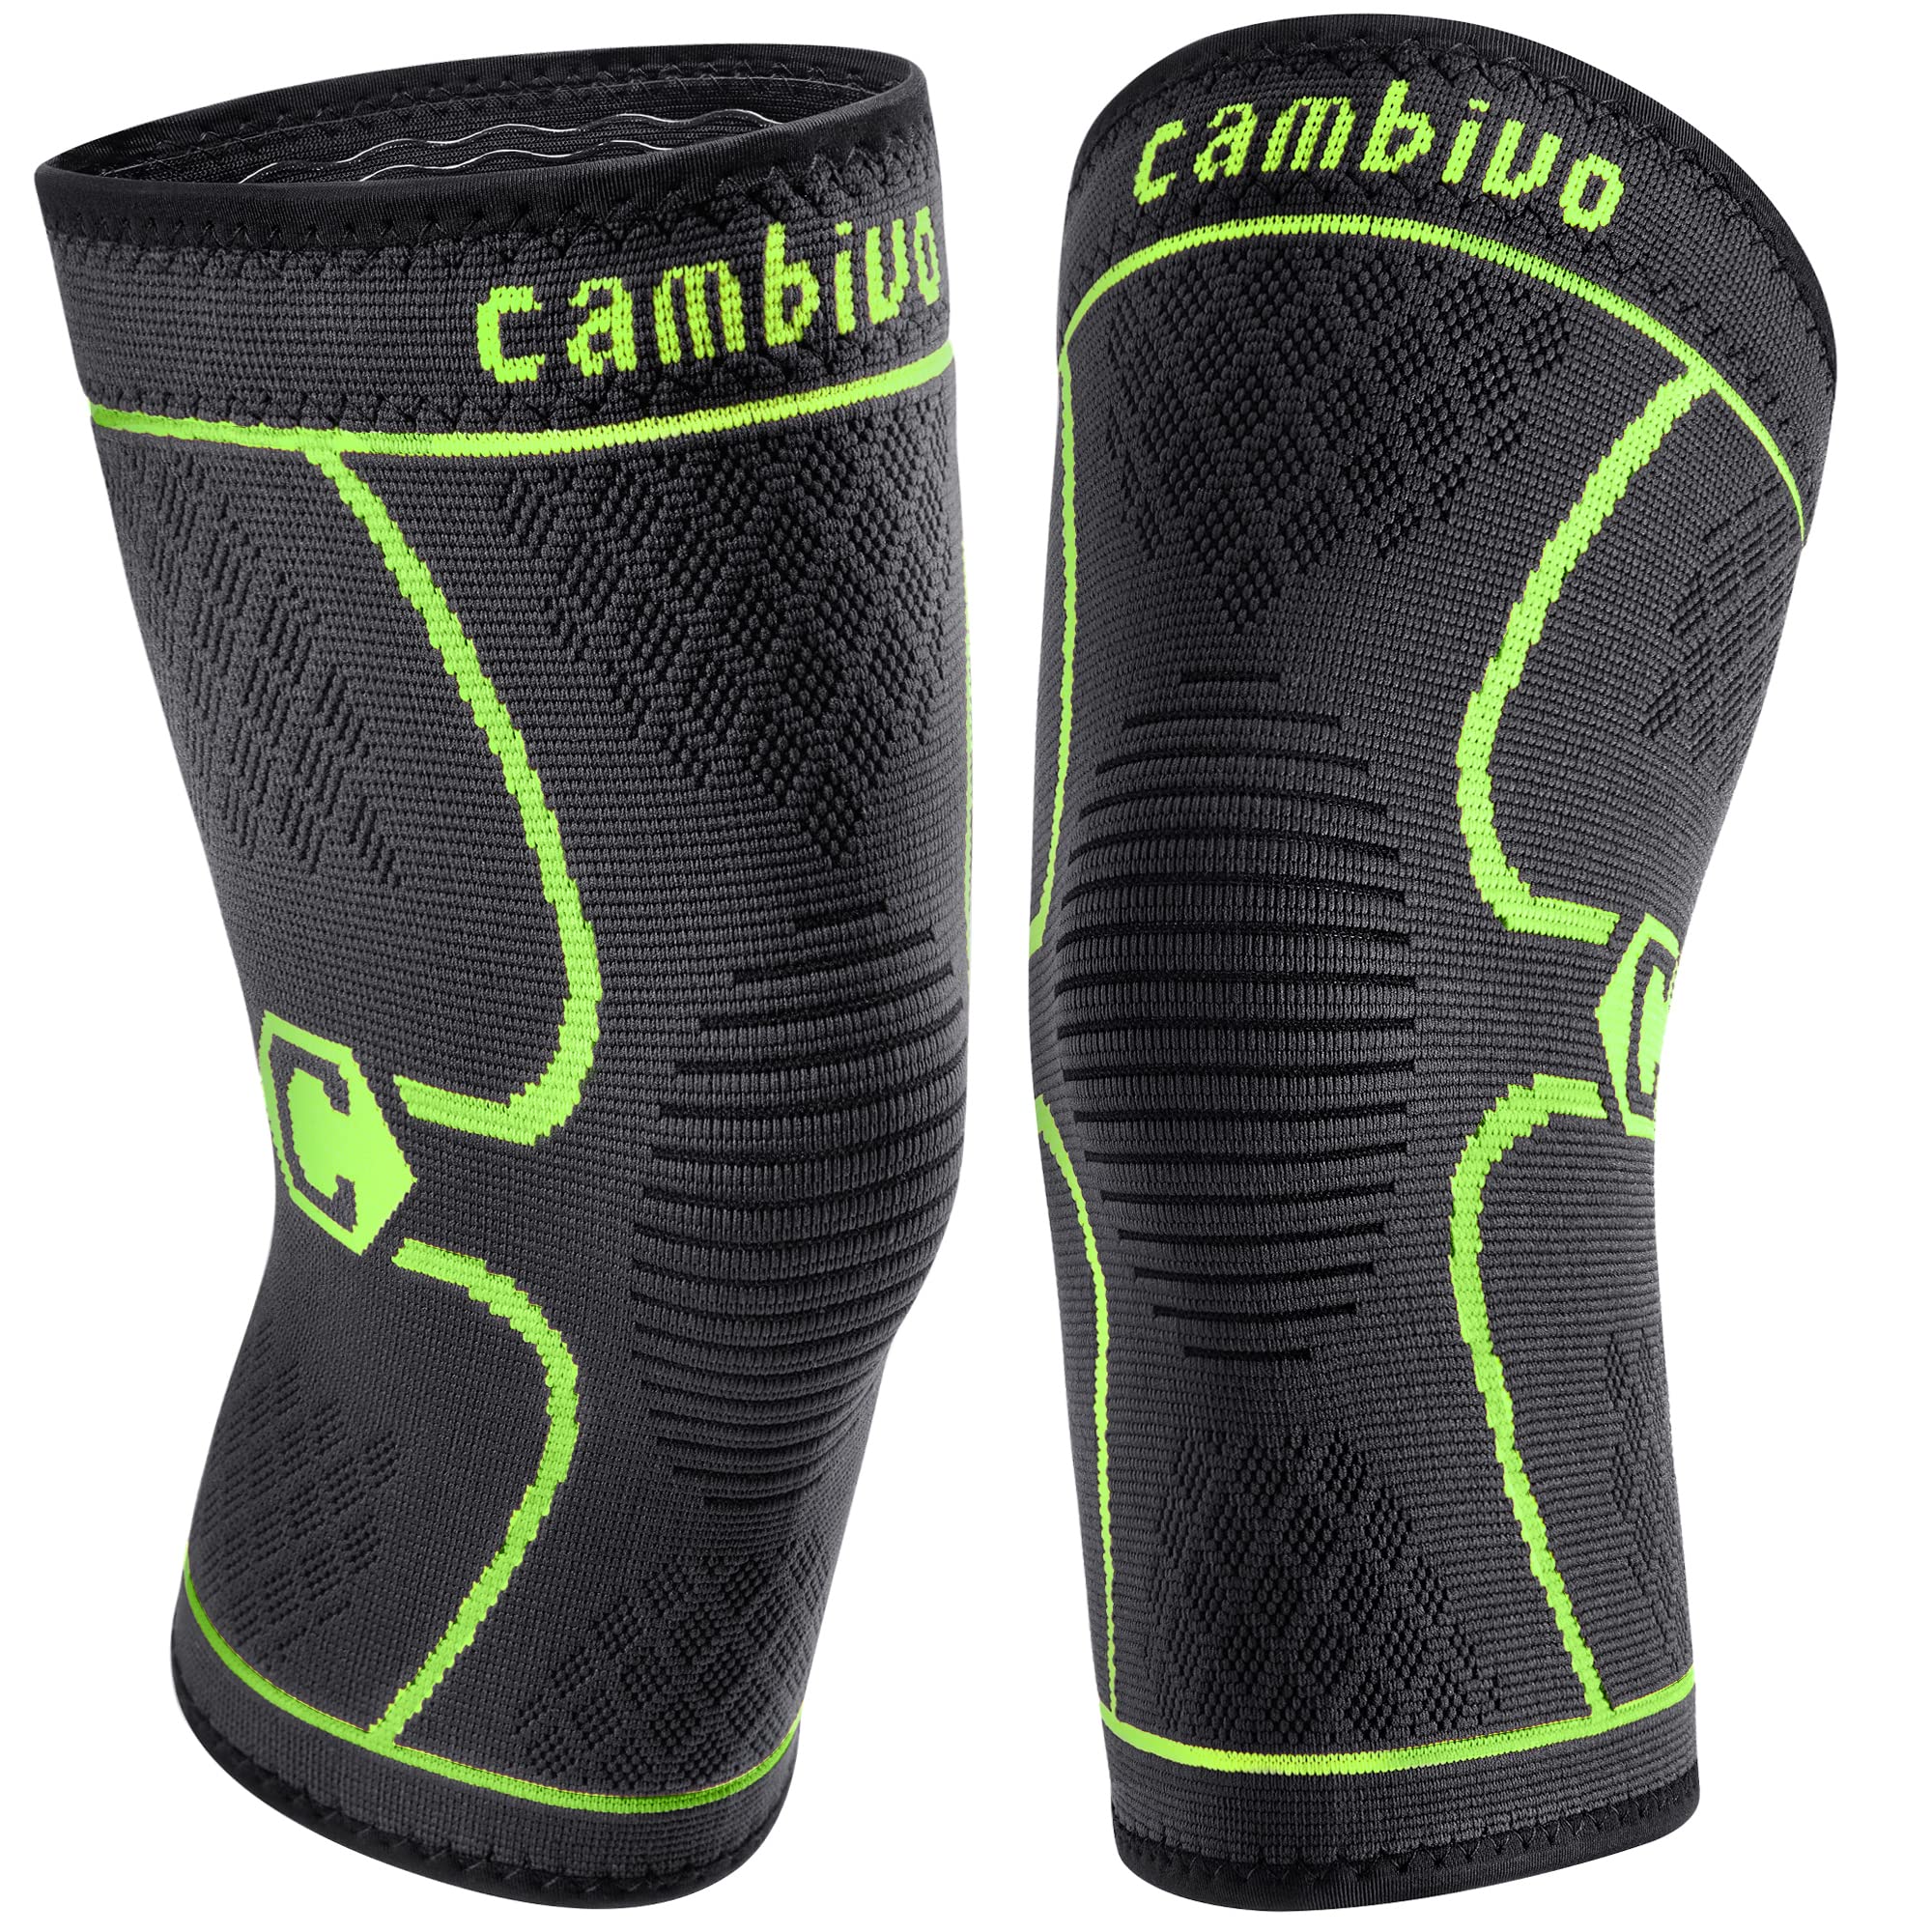 CAMBIVO 2 Pack Knee Brace, Knee Compression Sleeve for Men and Women, Knee  Support for Running, Workout, Gym, Hiking, Sports (Green, X-Large)